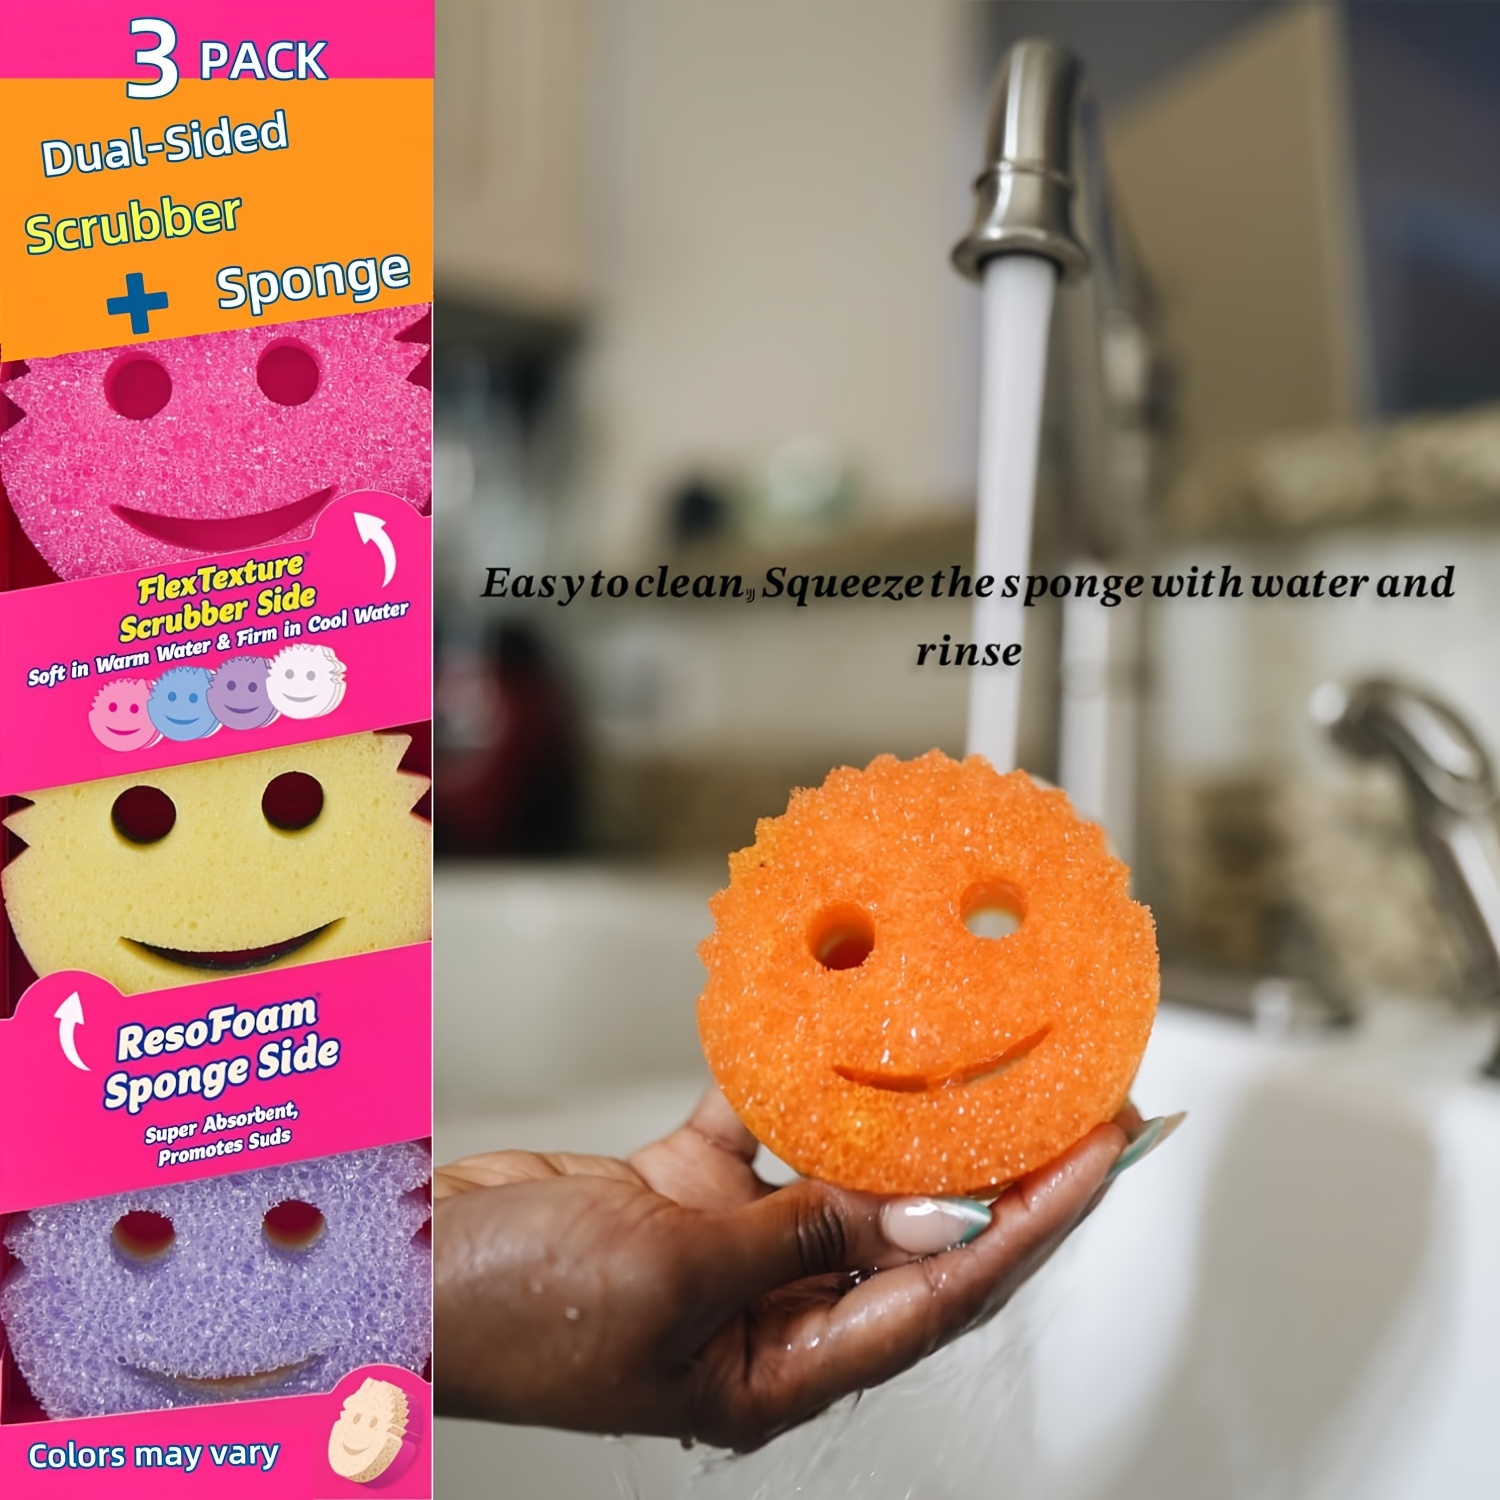 

3-piece Dual-sided Kitchen Sponges - Temperature Sensitive, Non-scratch Cleaning Pads For Dishes & More - Multi-surface Safe